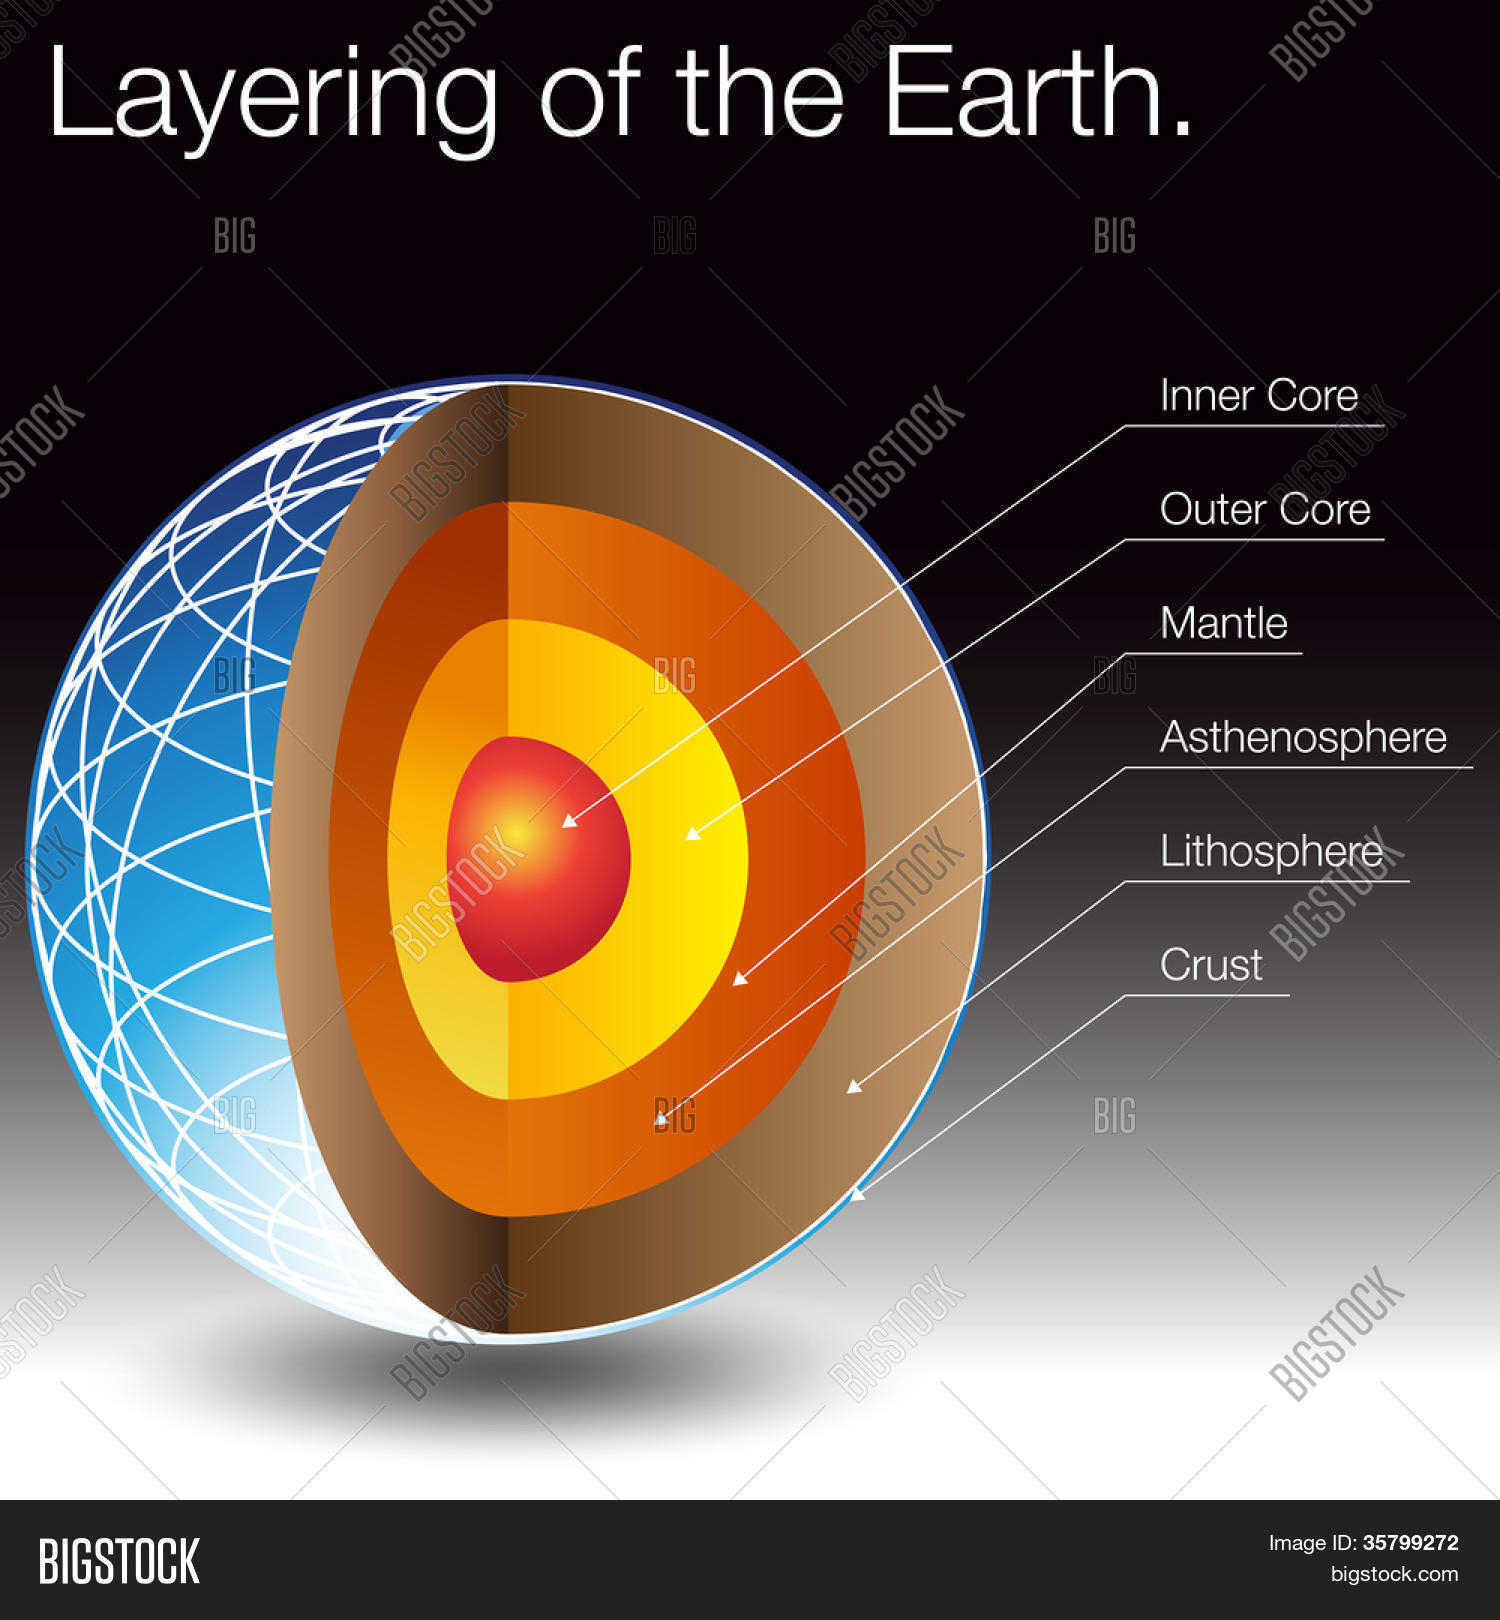 Diagram Of The Earth's Layers Layers Earth Research Paper Academic Writing Service August 2019